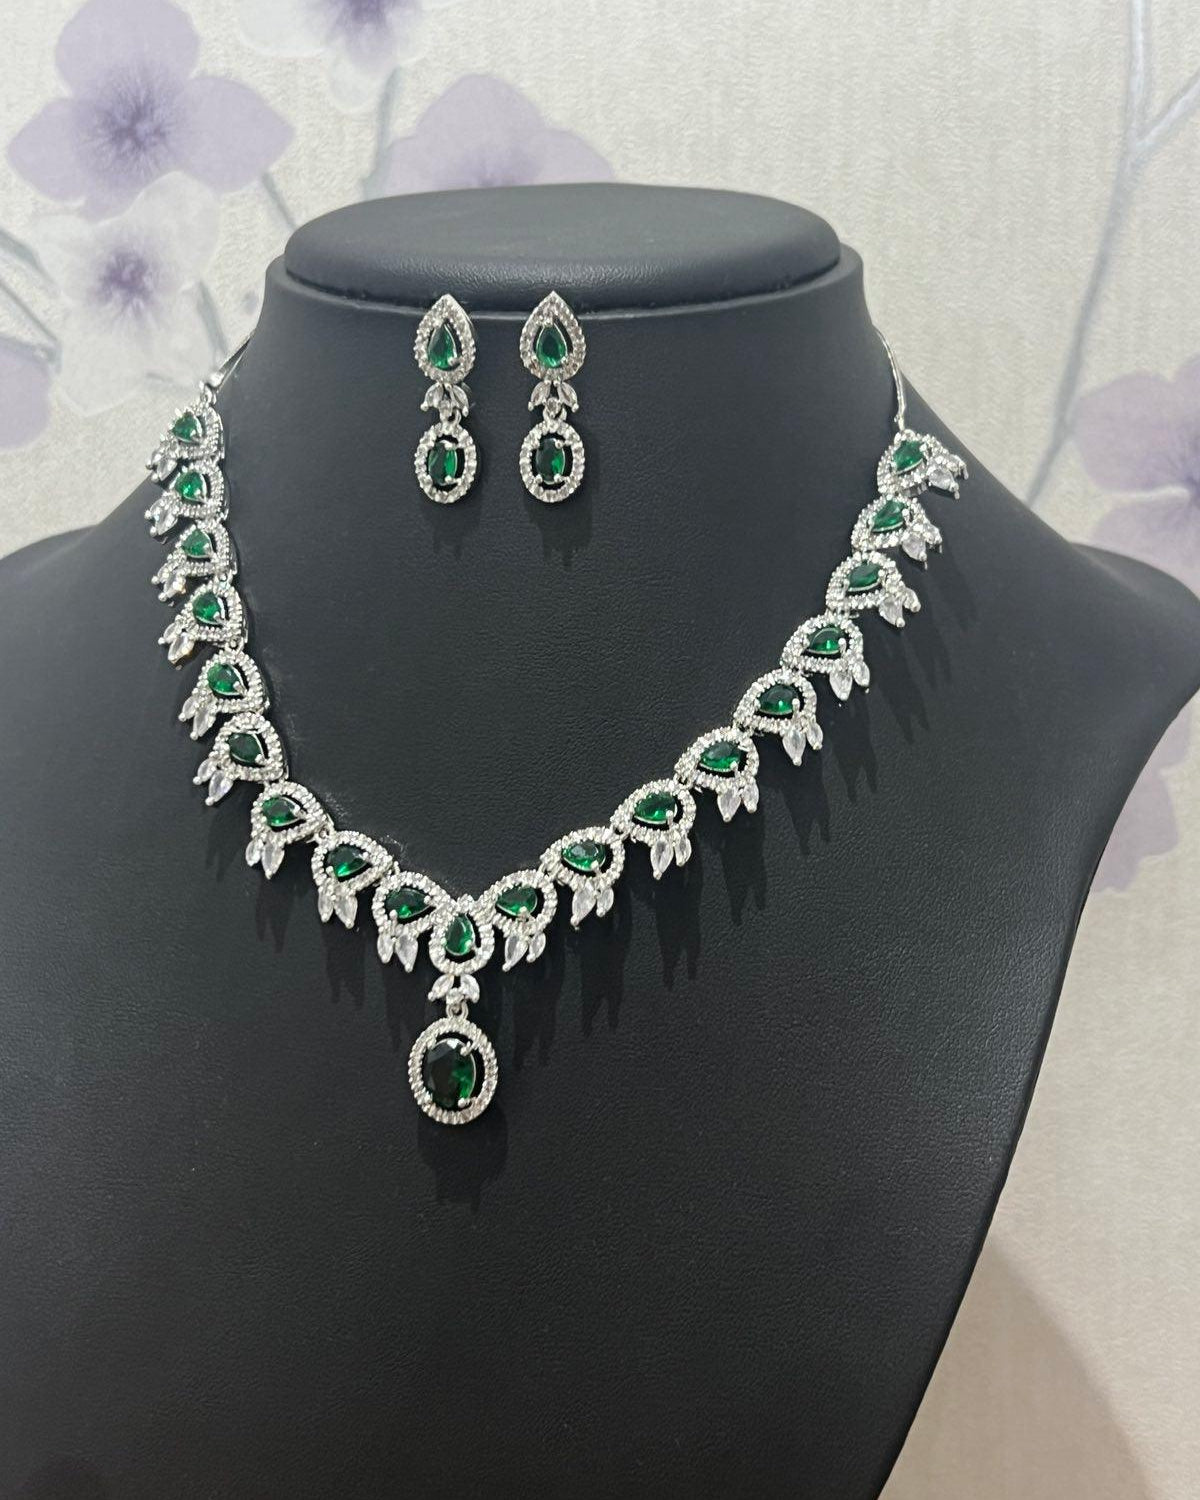 American Diamond Necklace with Green Stone - Boutique Nepal